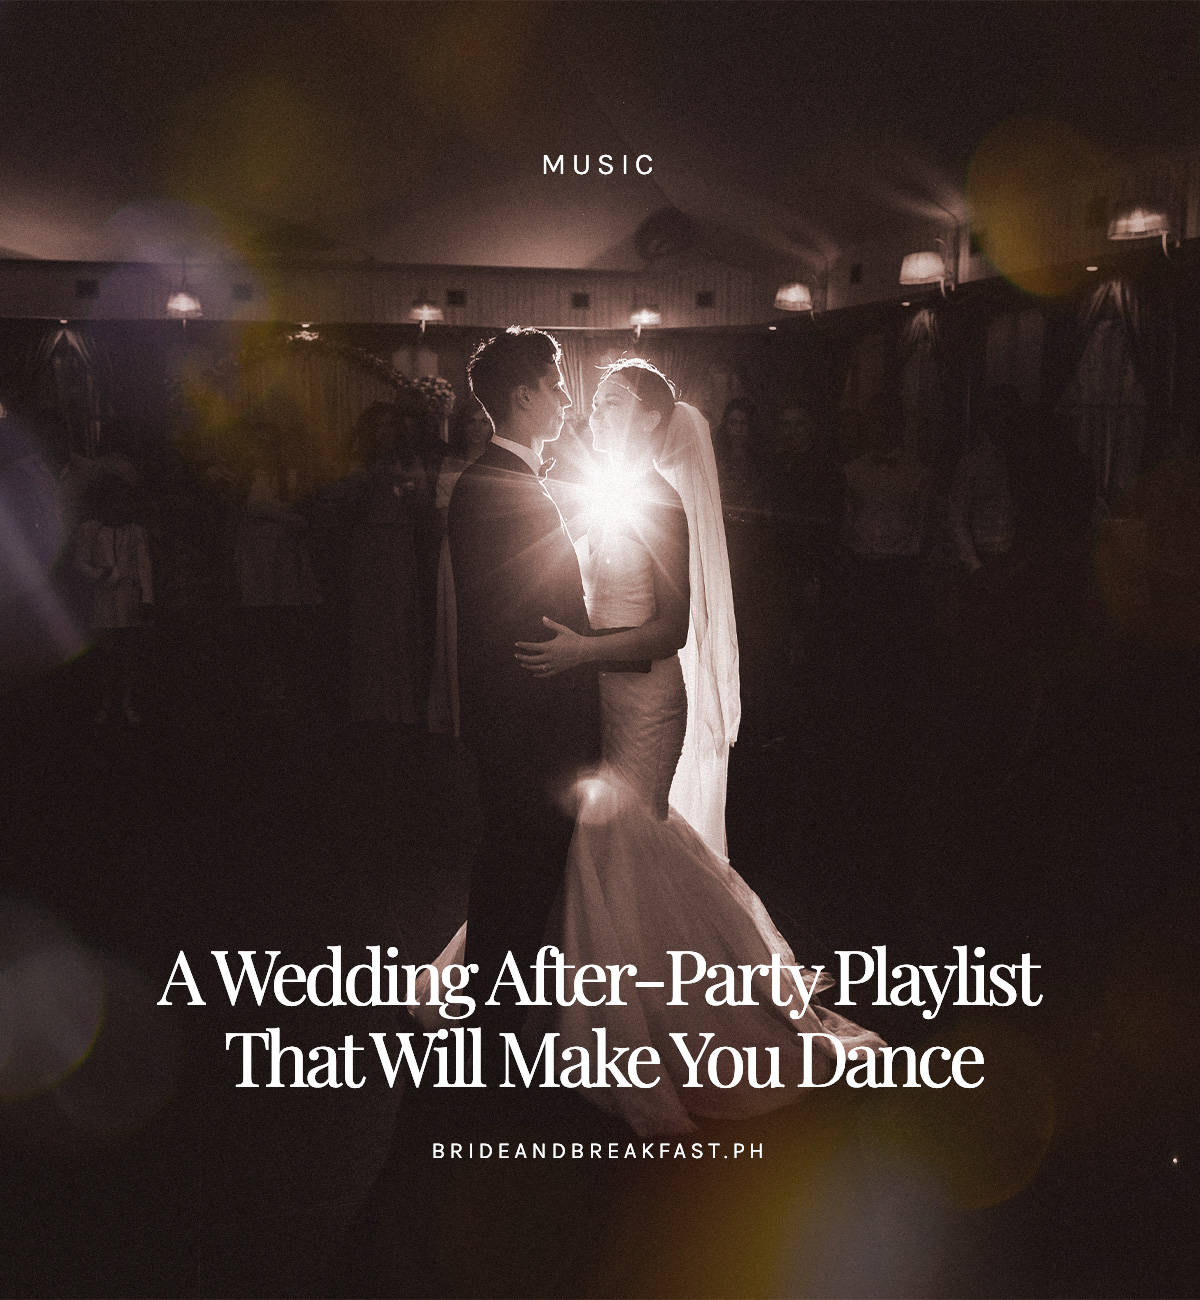 A Wedding After-Party Playlist That Will Make You Dance